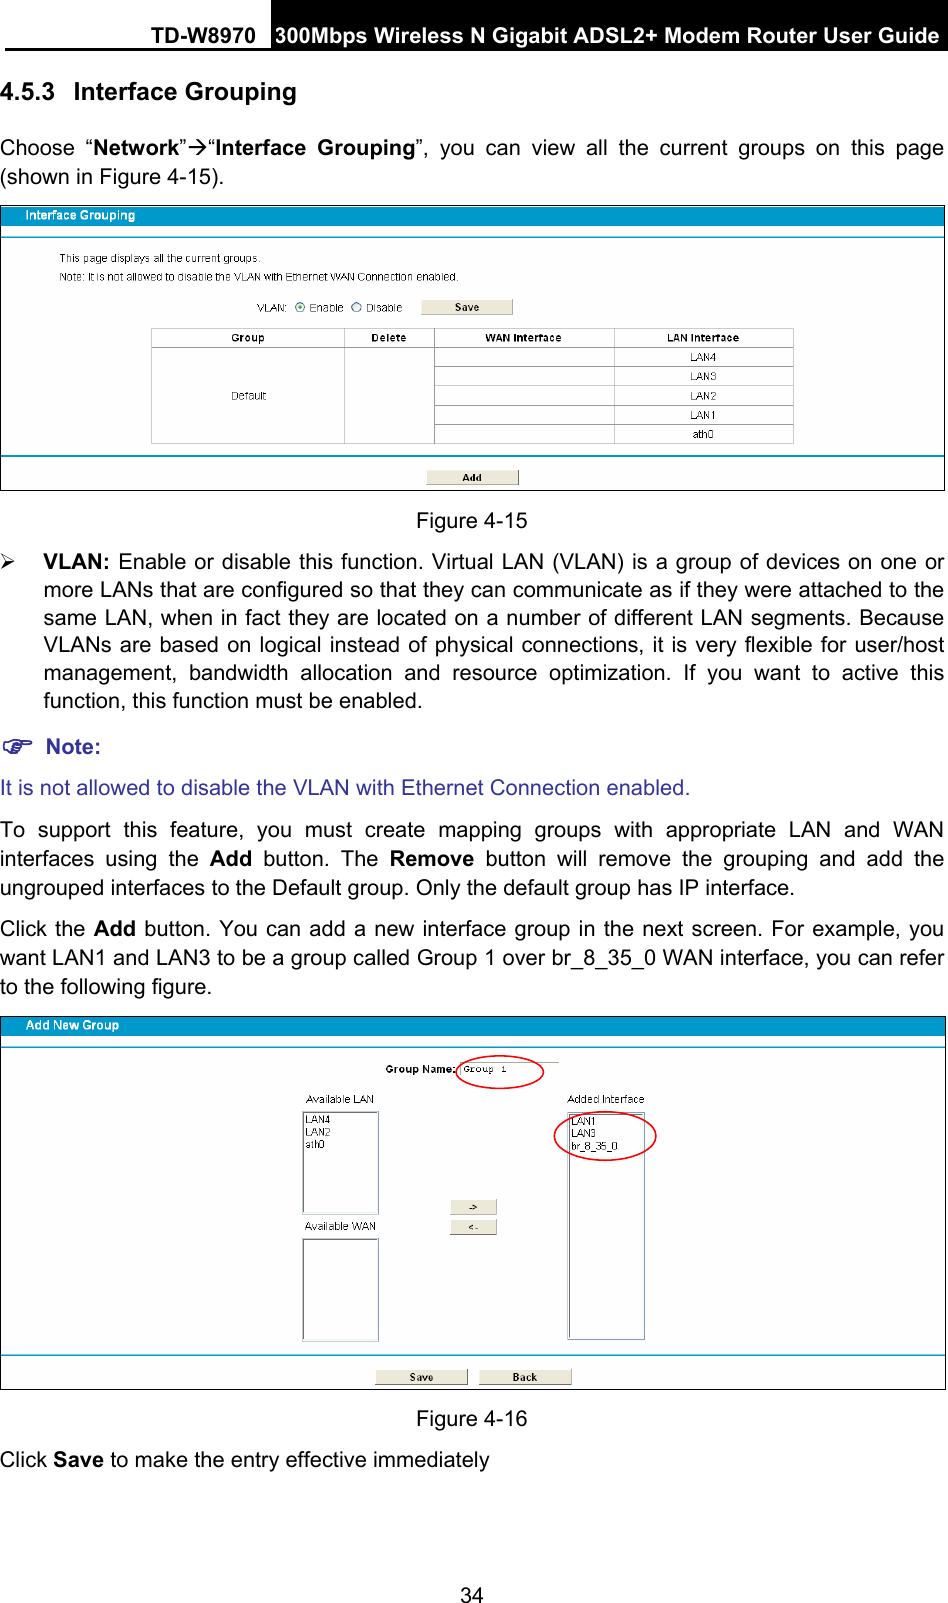 TD-W8970 300Mbps Wireless N Gigabit ADSL2+ Modem Router User Guide 34 4.5.3  Interface Grouping Choose “Network”Æ“Interface Grouping”, you can view all the current groups on this page (shown in Figure 4-15).   Figure 4-15 ¾ VLAN: Enable or disable this function. Virtual LAN (VLAN) is a group of devices on one or more LANs that are configured so that they can communicate as if they were attached to the same LAN, when in fact they are located on a number of different LAN segments. Because VLANs are based on logical instead of physical connections, it is very flexible for user/host management, bandwidth allocation and resource optimization. If you want to active this function, this function must be enabled.   ) Note: It is not allowed to disable the VLAN with Ethernet Connection enabled. To support this feature, you must create mapping groups with appropriate LAN and WAN interfaces using the Add button. The Remove button will remove the grouping and add the ungrouped interfaces to the Default group. Only the default group has IP interface. Click the Add button. You can add a new interface group in the next screen. For example, you want LAN1 and LAN3 to be a group called Group 1 over br_8_35_0 WAN interface, you can refer to the following figure.    Figure 4-16 Click Save to make the entry effective immediately 